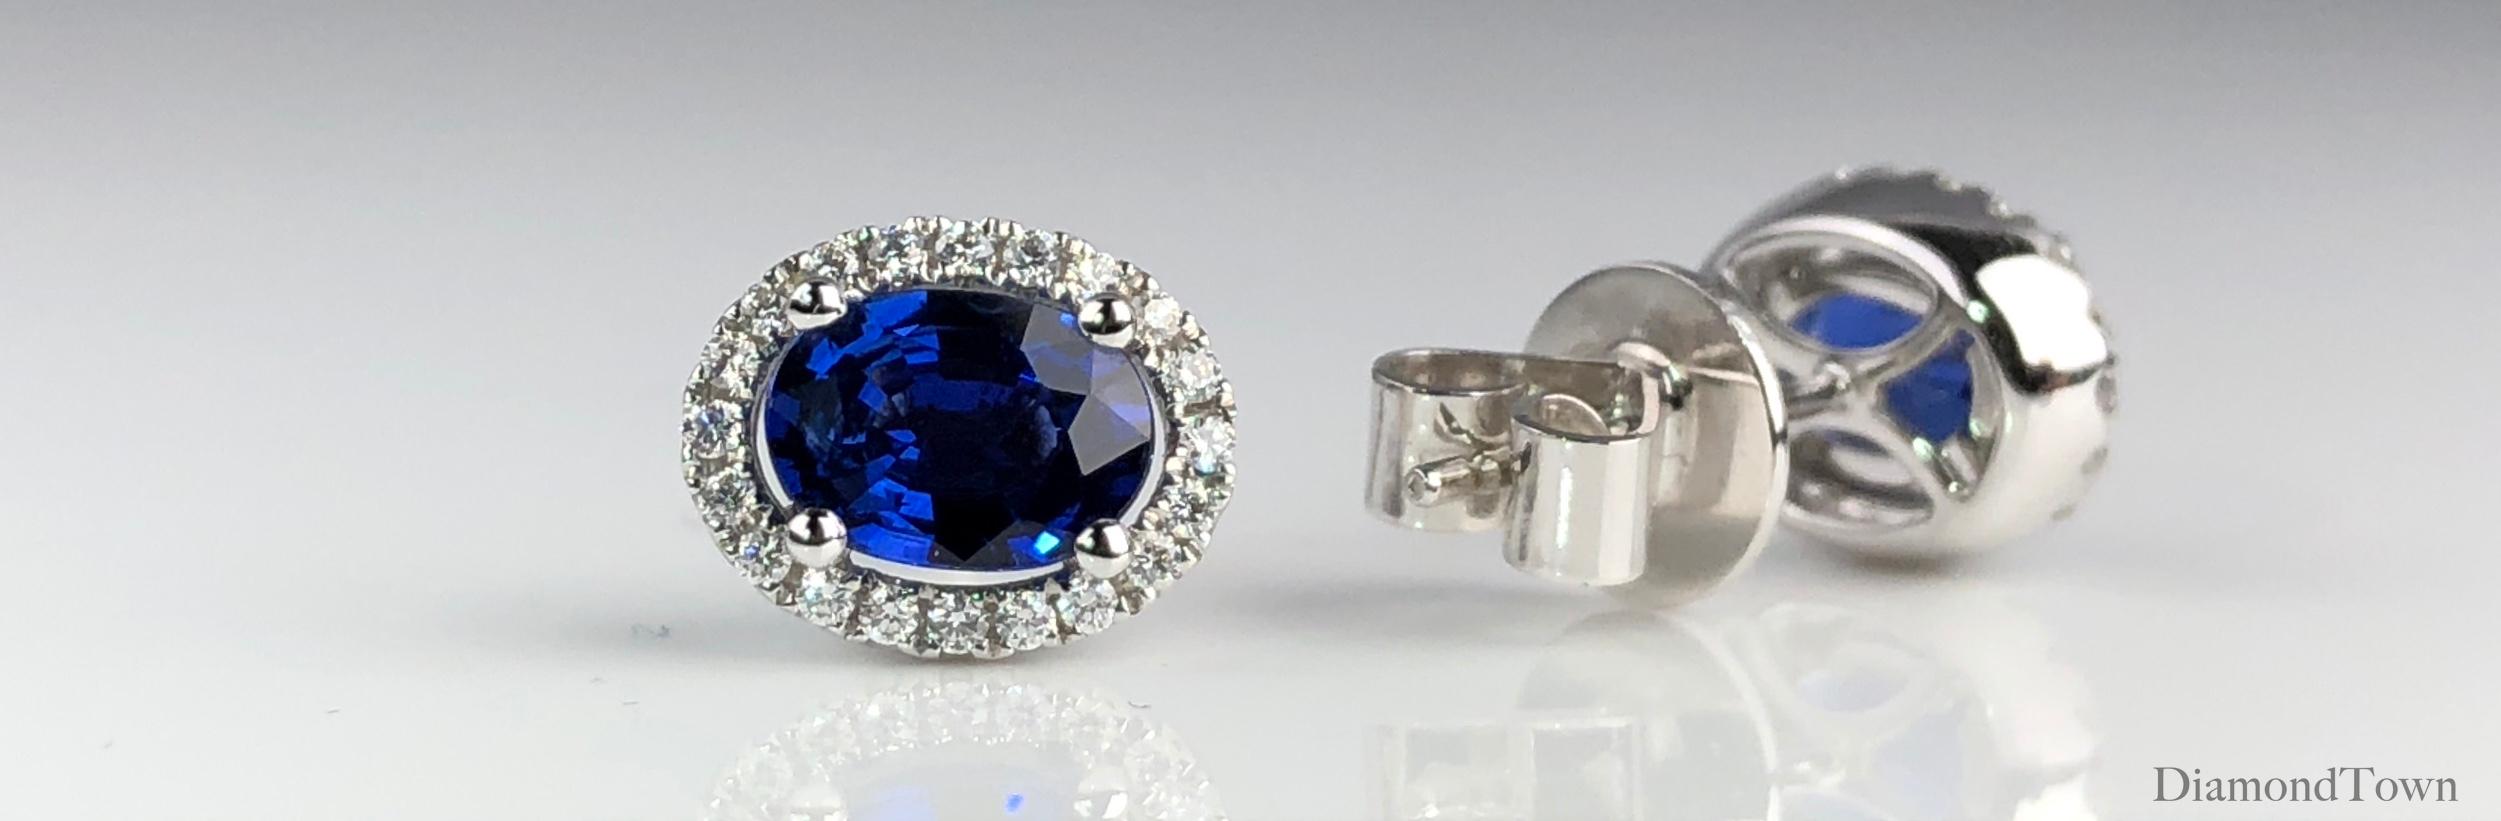 These lovely earrings feature an oval cut vivid blue sapphire (total weight 1.65 carats), surrounded by a a halo of round white diamonds (total weight 0.19 carats).

There is a seasonal promotion available on this piece.  For details please inquire